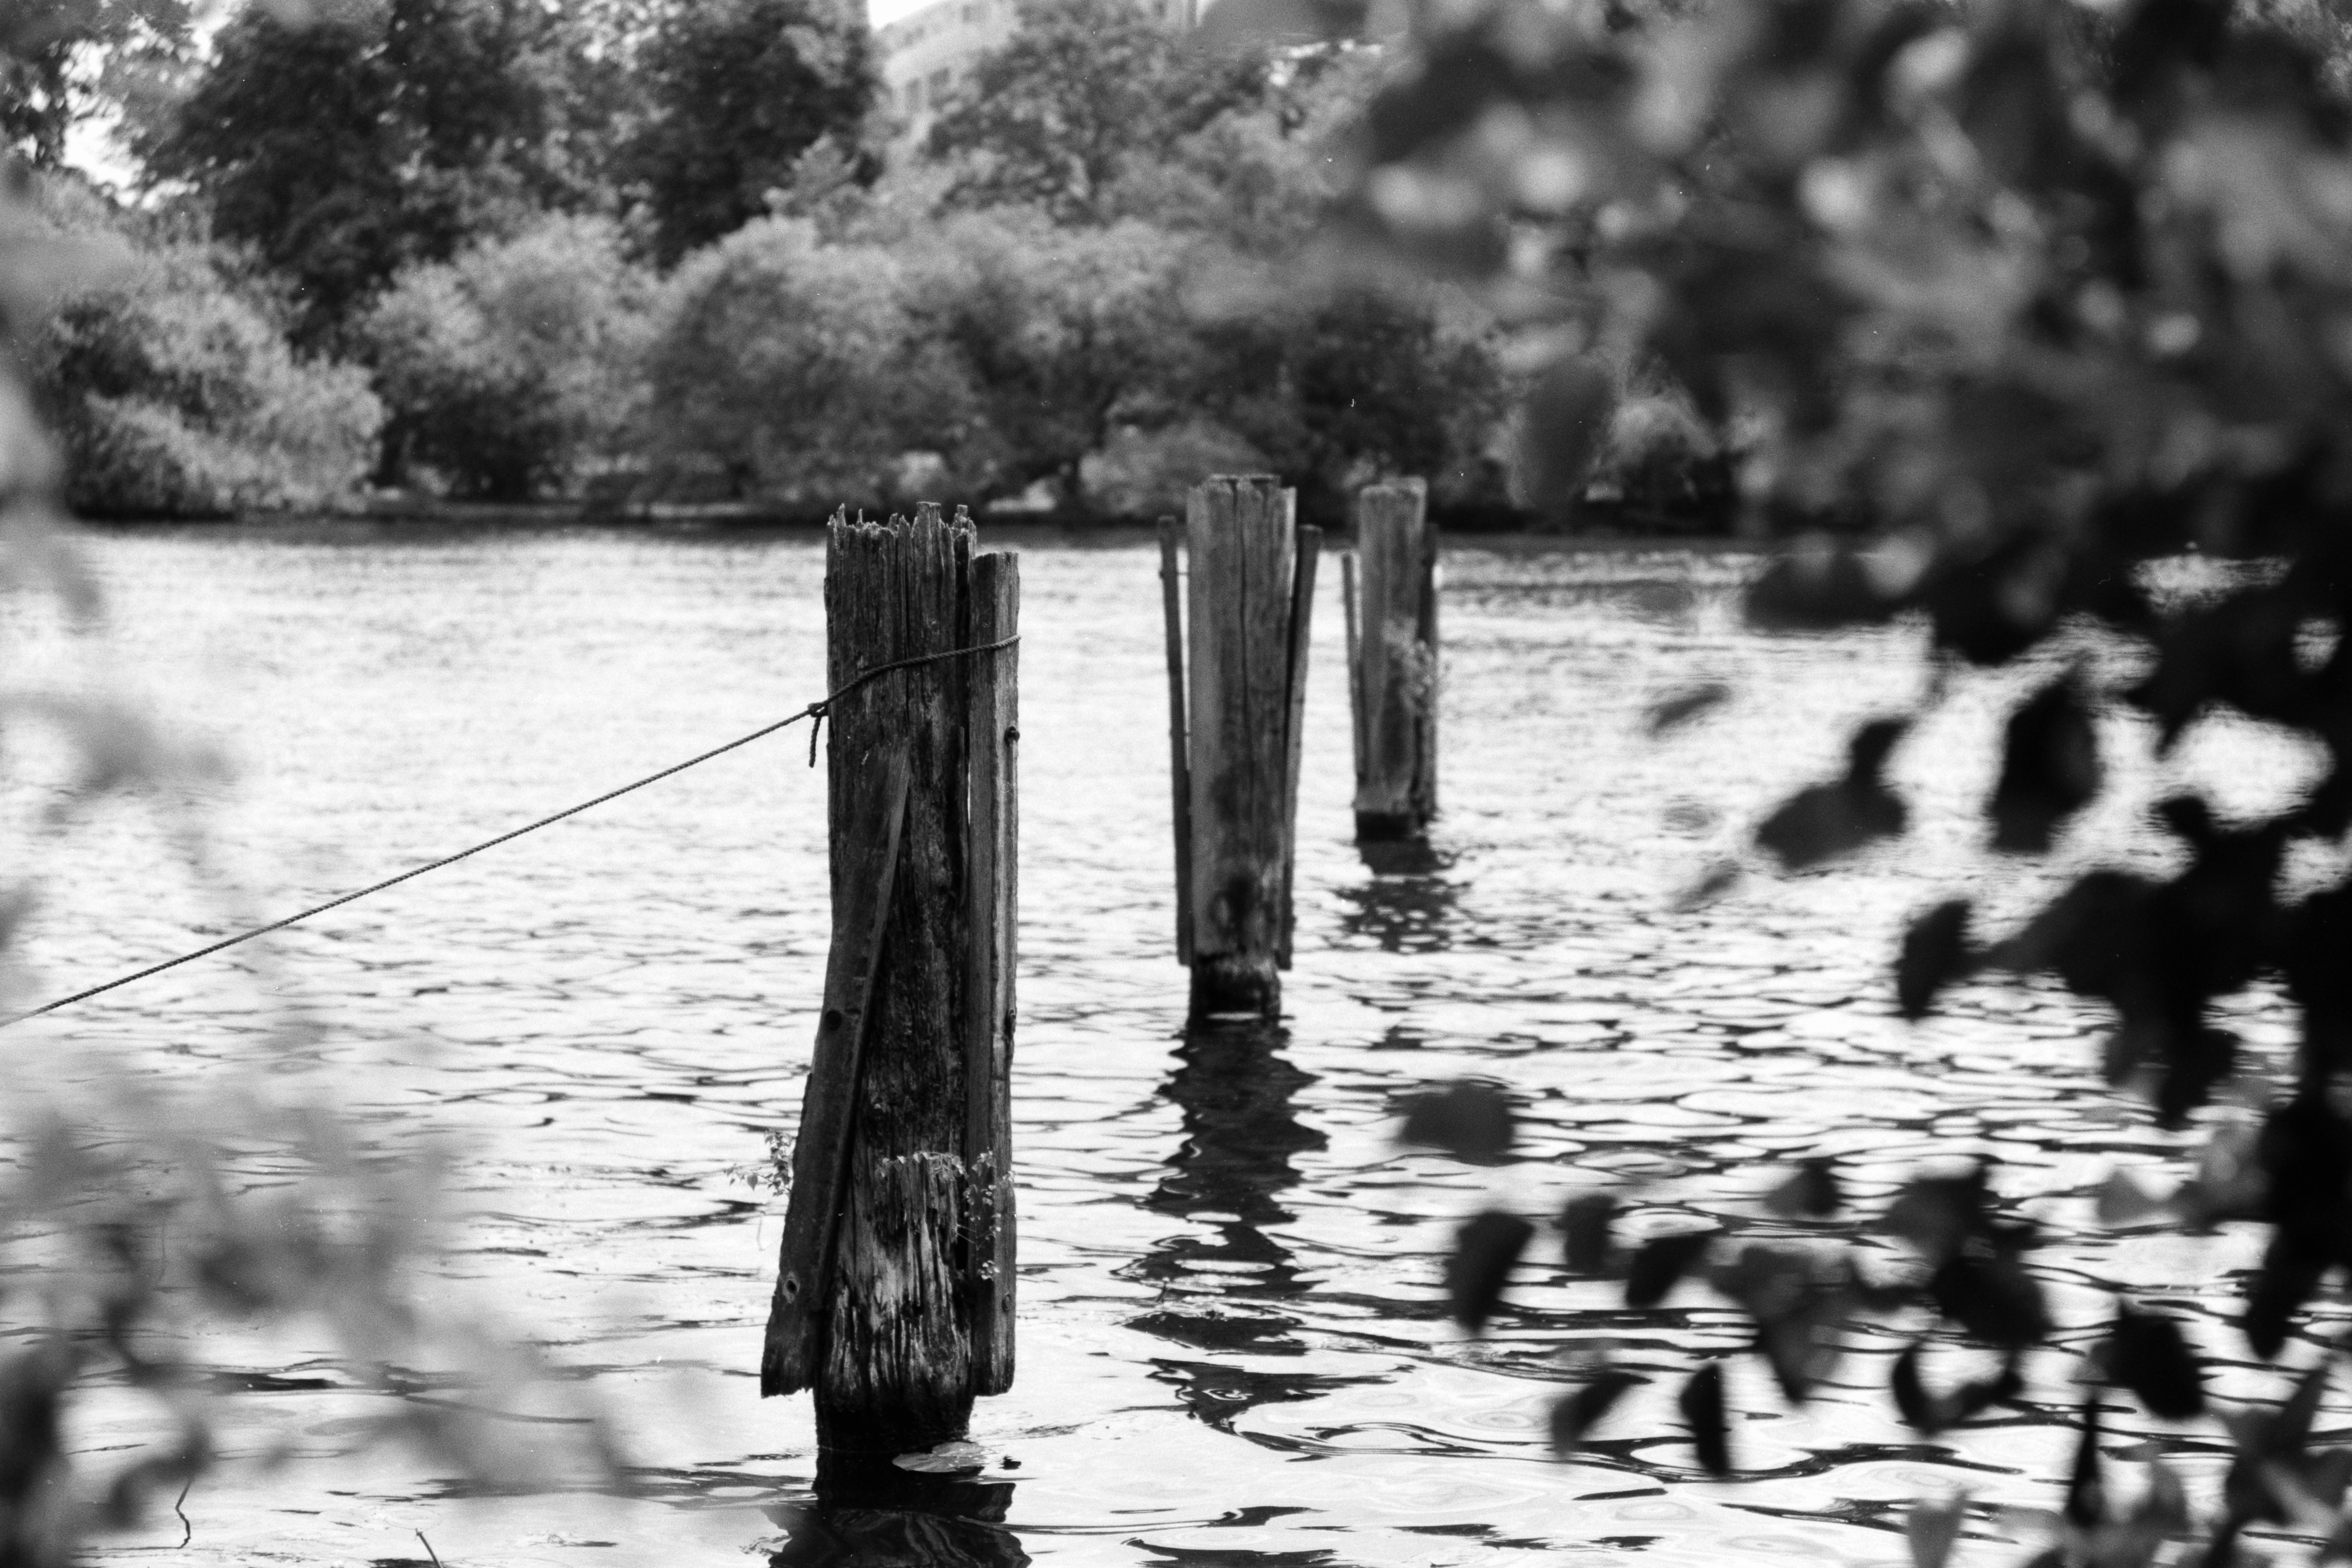 Three poles in a river, framed by leaves in the forground.